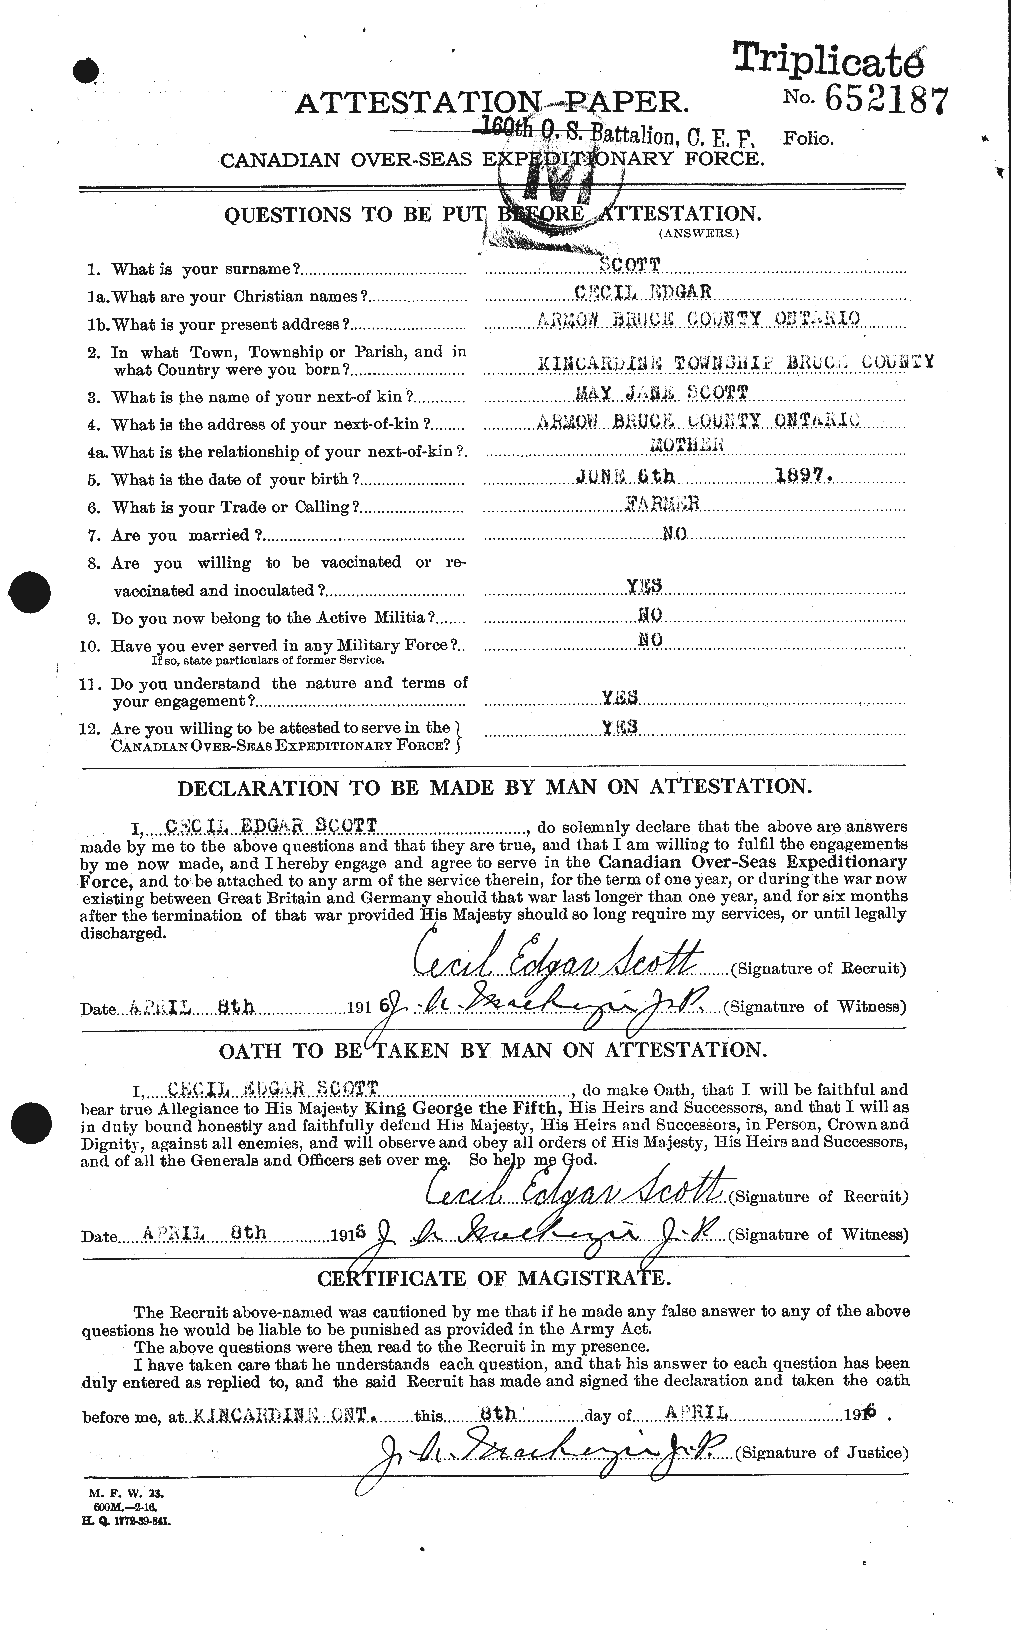 Personnel Records of the First World War - CEF 086202a